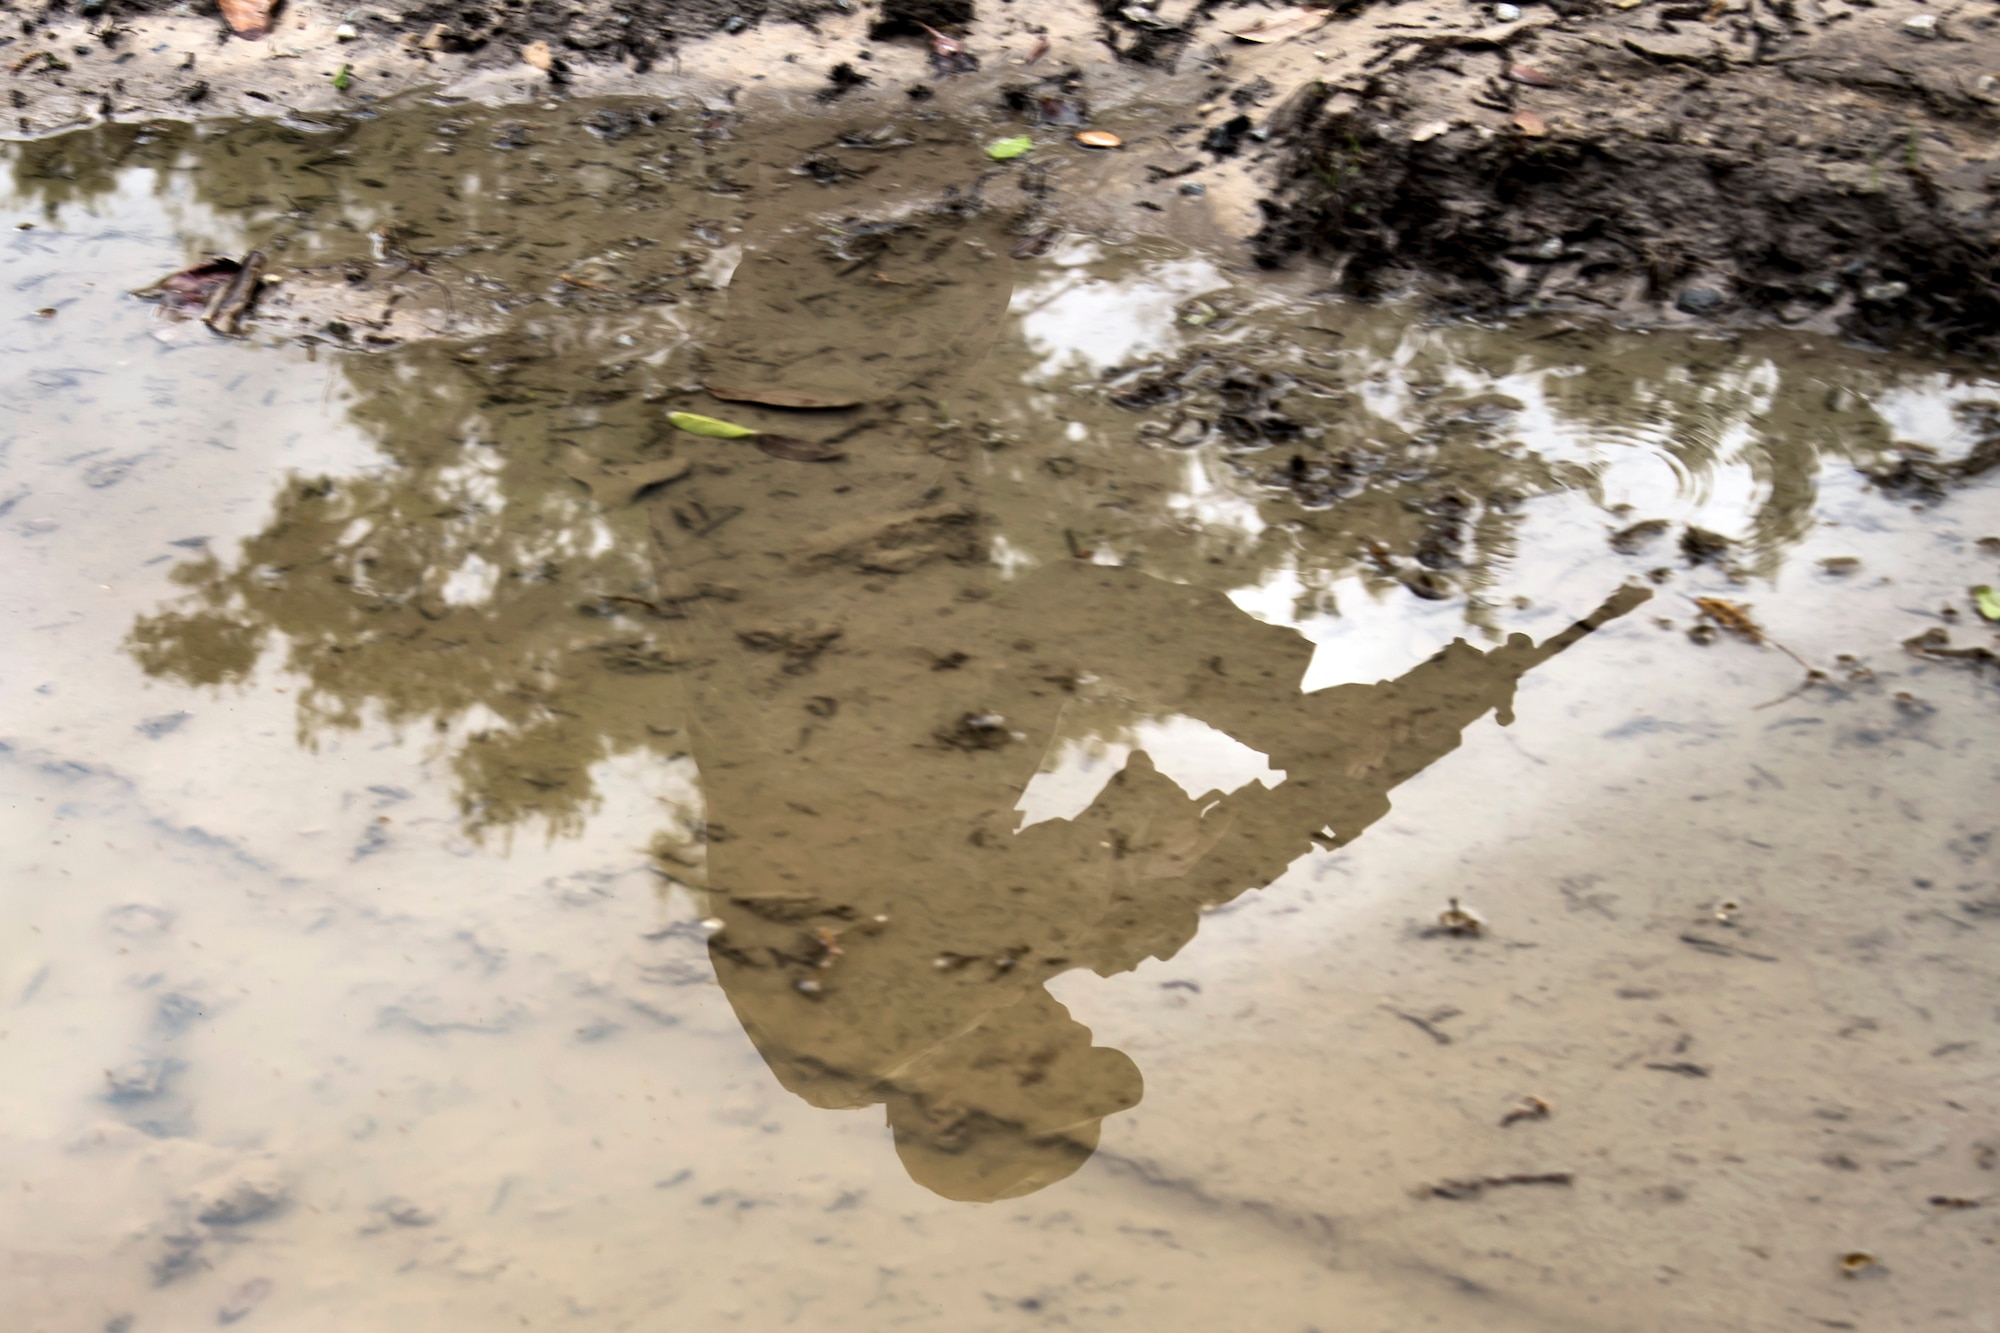 A puddle shows the reflection of an Airman from the 820th Base Defense Group (BDG) during a dismounted operations training, March 27, 2018, at Moody Air Force Base, Ga. The dismounted ops training is part of an Initial Qualification Training, which gives new Airmen coming into the BDG an opportunity to learn a baseline of basic combat skills that will be needed to successfully operate within a cohesive unit while in a deployed environment. (U.S. Air Force photo by Airman Eugene Oliver)